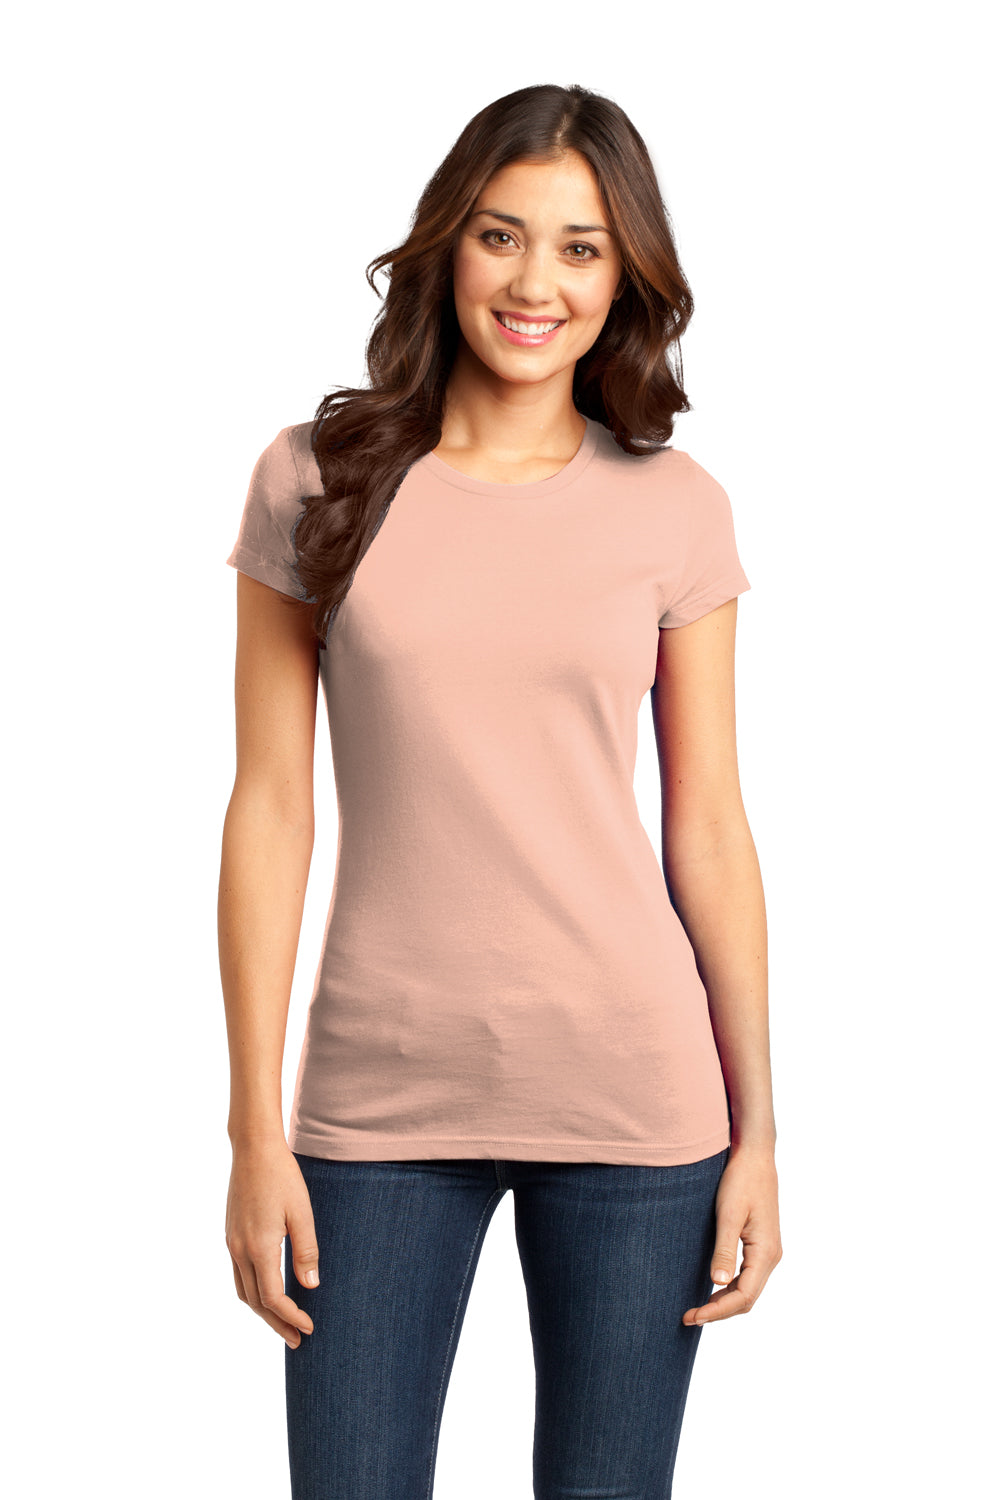 District DT6001 Womens Very Important Short Sleeve Crewneck T-Shirt Peach Front